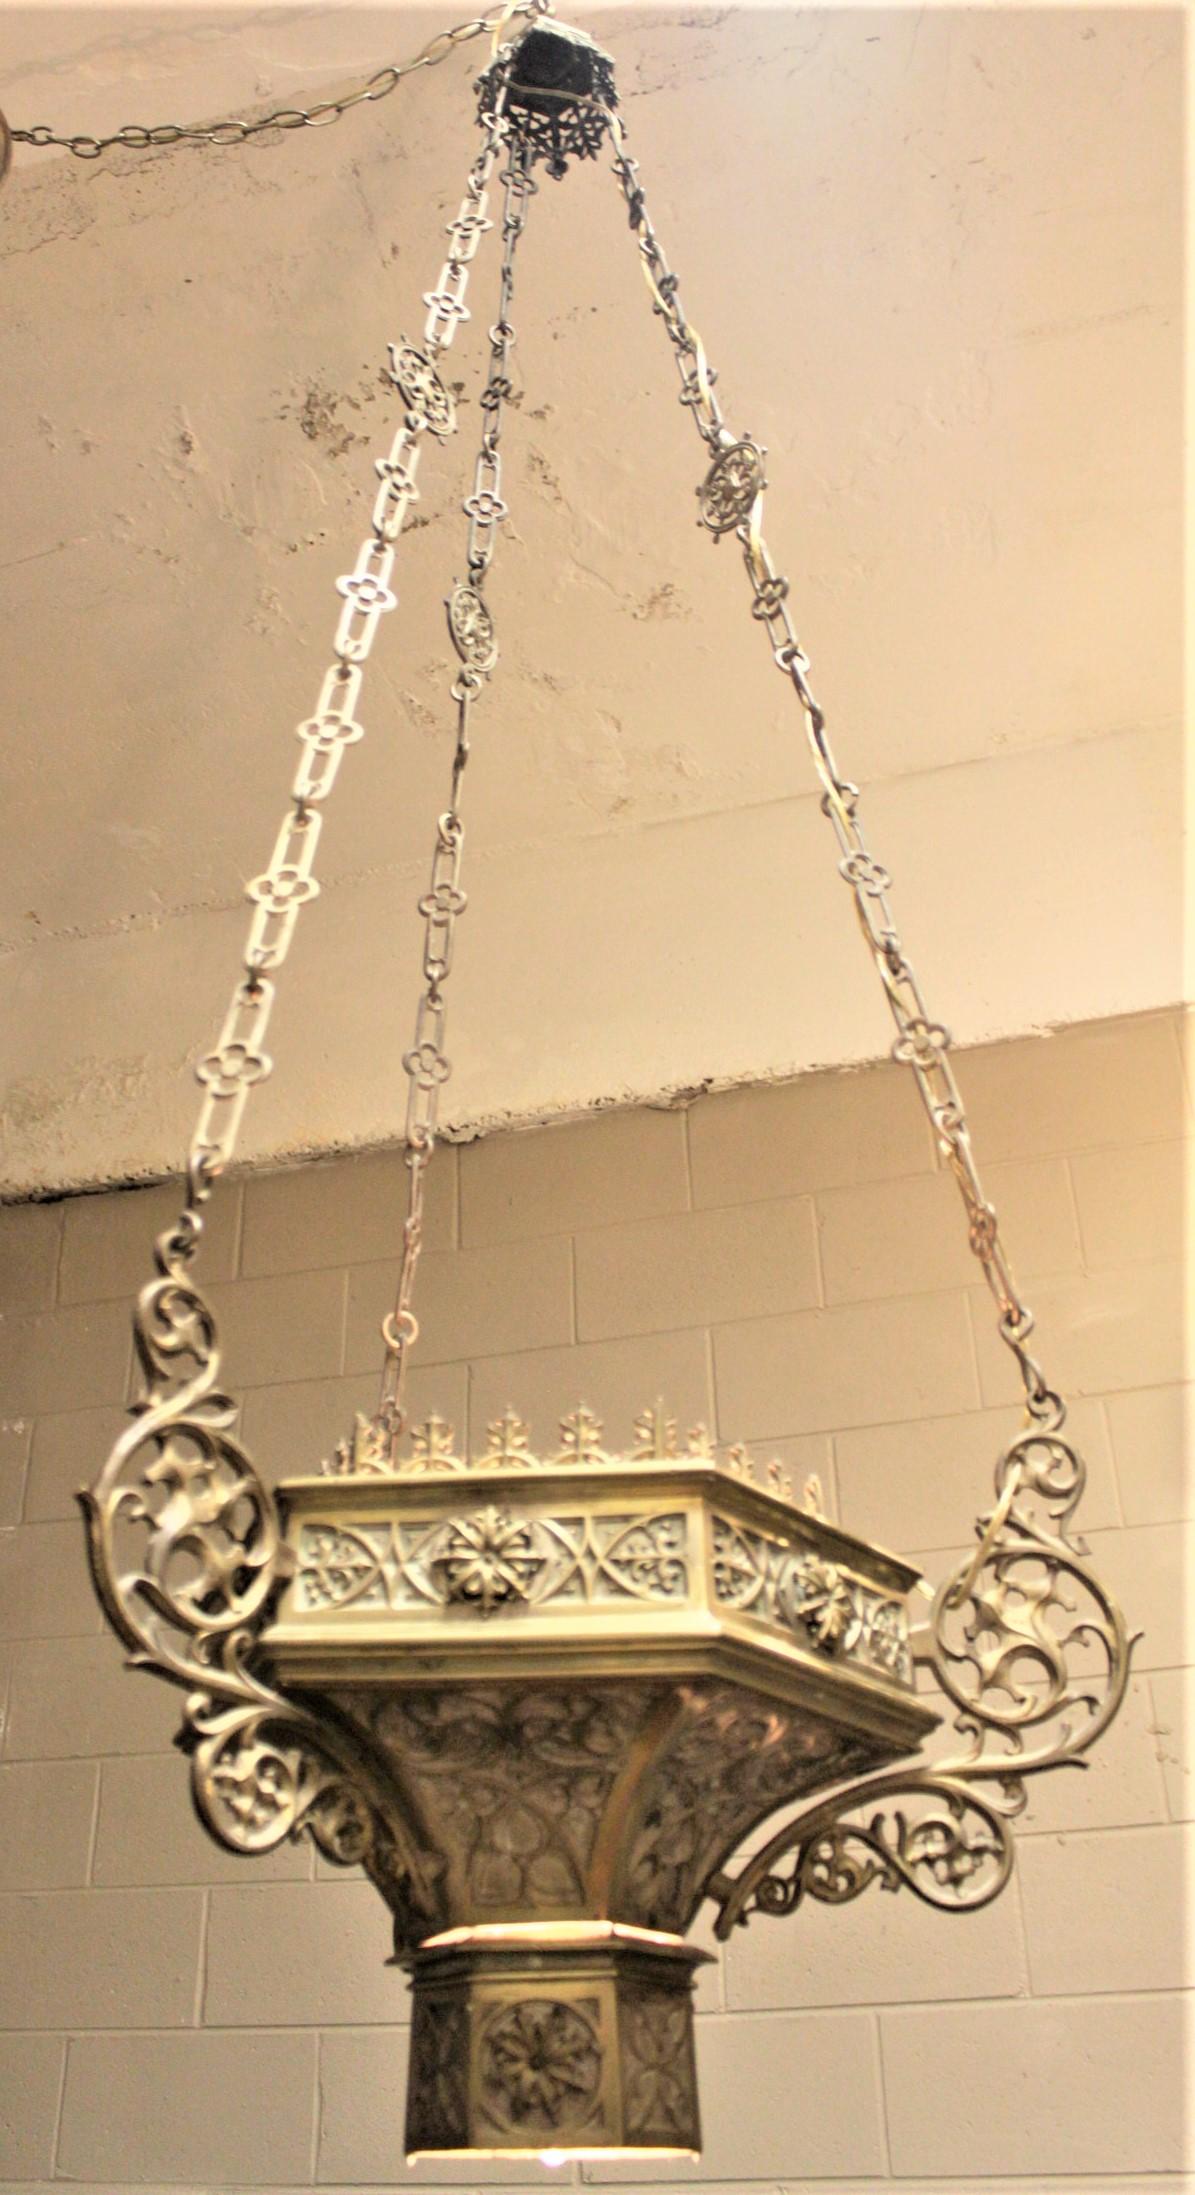 Antique Solid Cast Brass Gothic Revival Hanging Chandelier or Light Fixture In Good Condition For Sale In Hamilton, Ontario